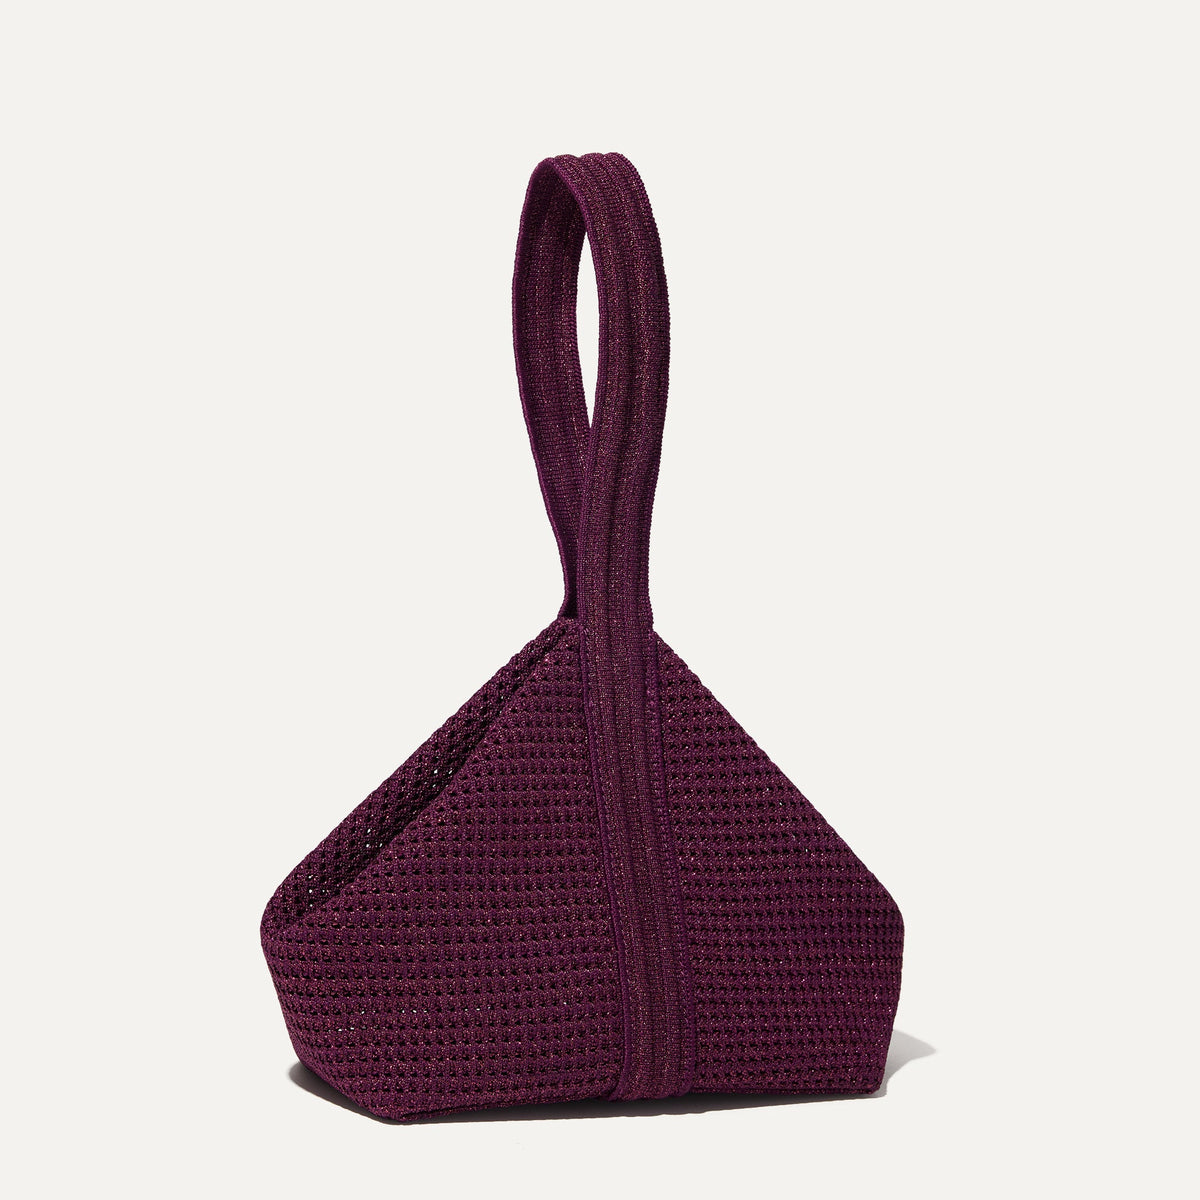 The Party Pouch in Garnet Sparkle